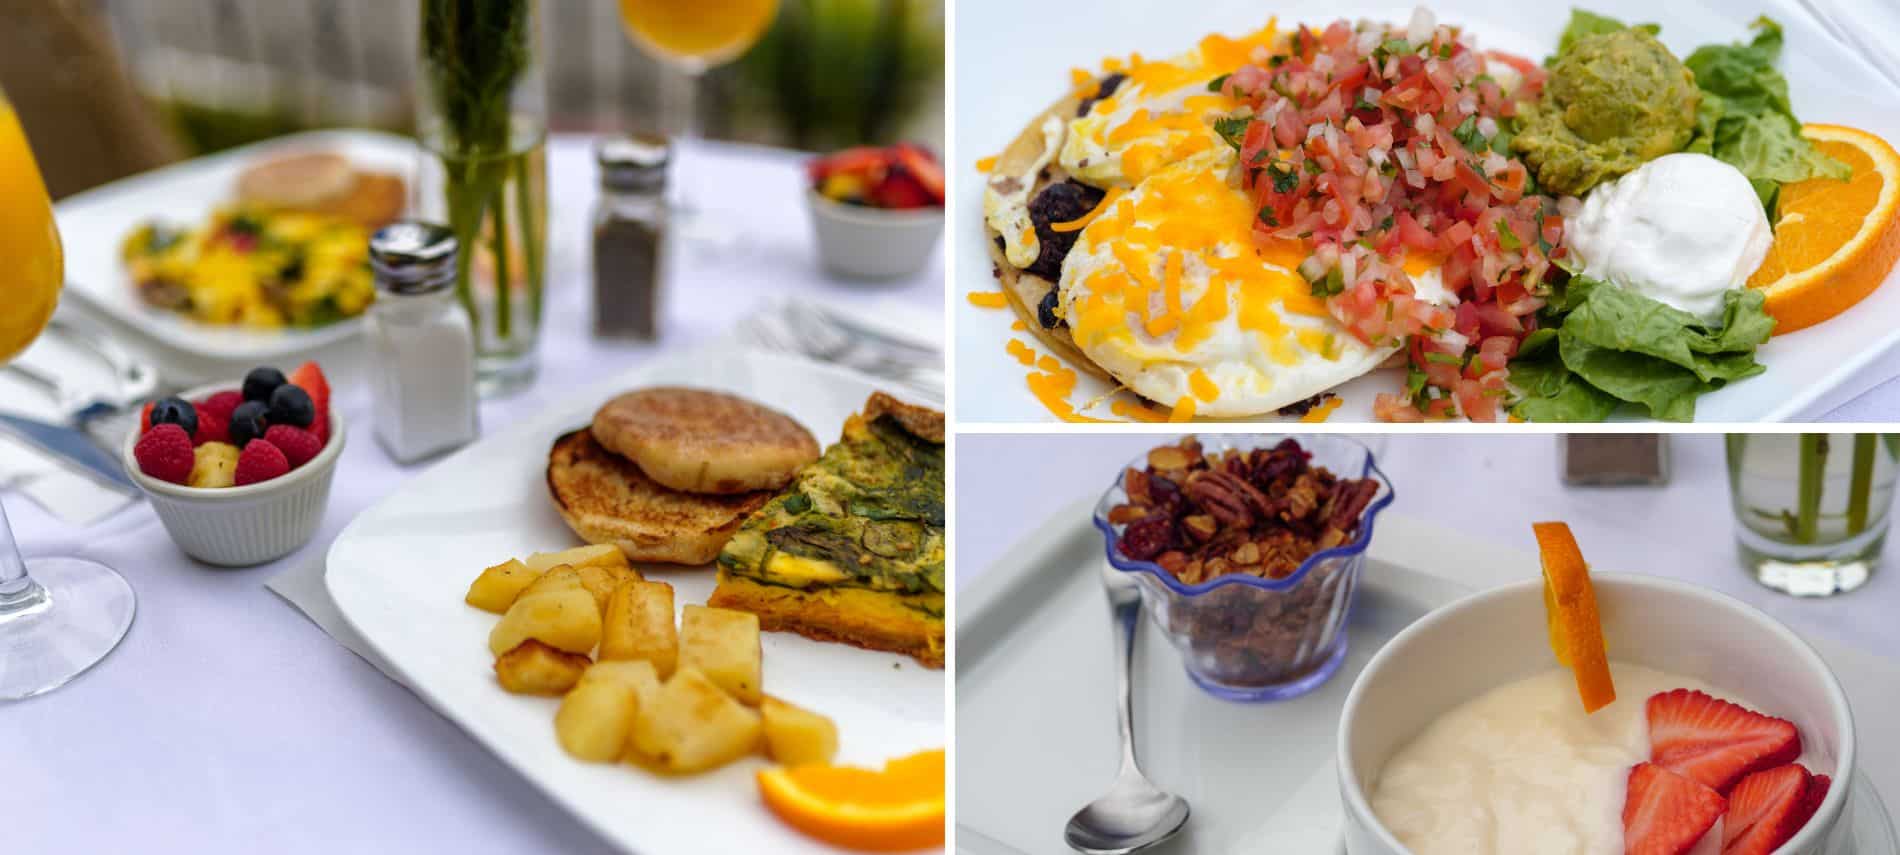 Collage of breakfast options at The Eagle Inn including Huevos Rancheros with Guacamole and Pico, Vegetable Quiche, and Yogurt with homemade granola